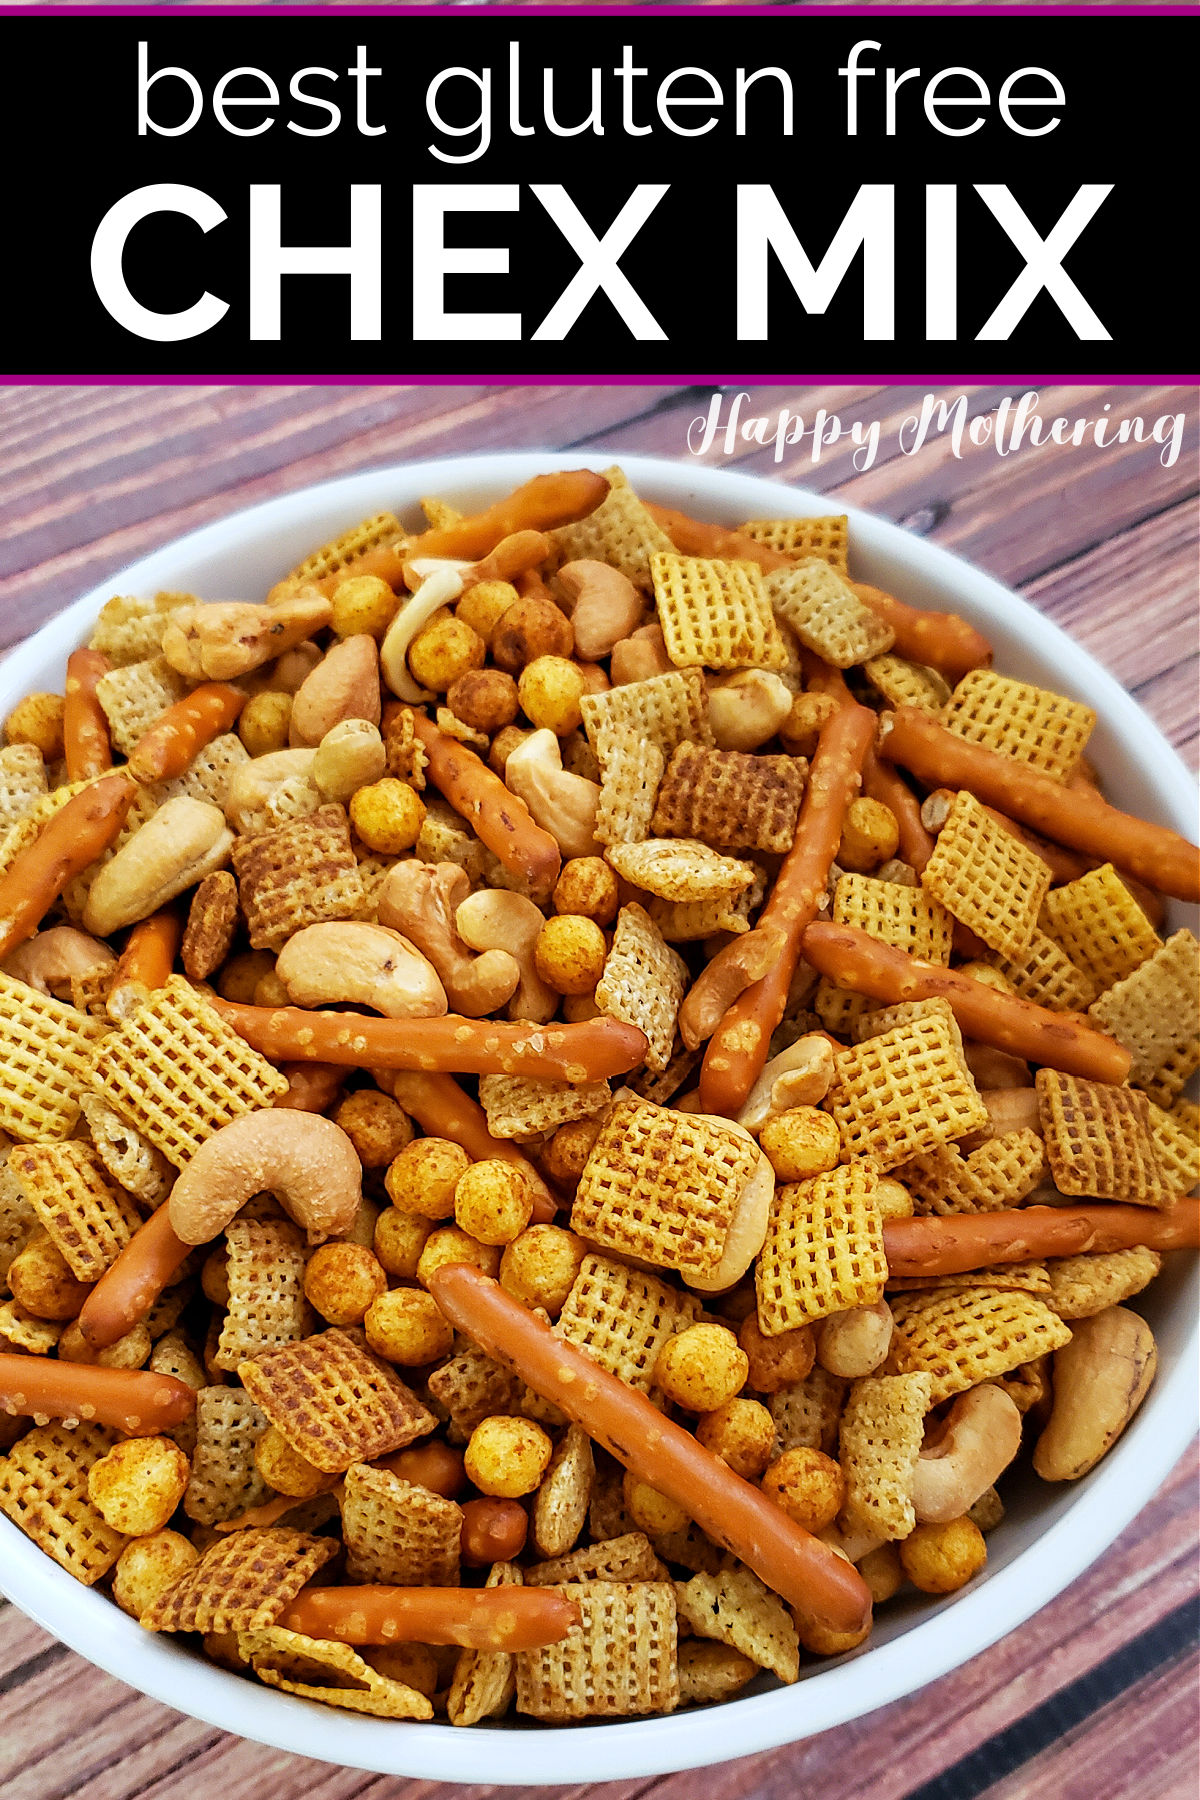 Bowl of homemade gluten free Chex mix being served at a party.